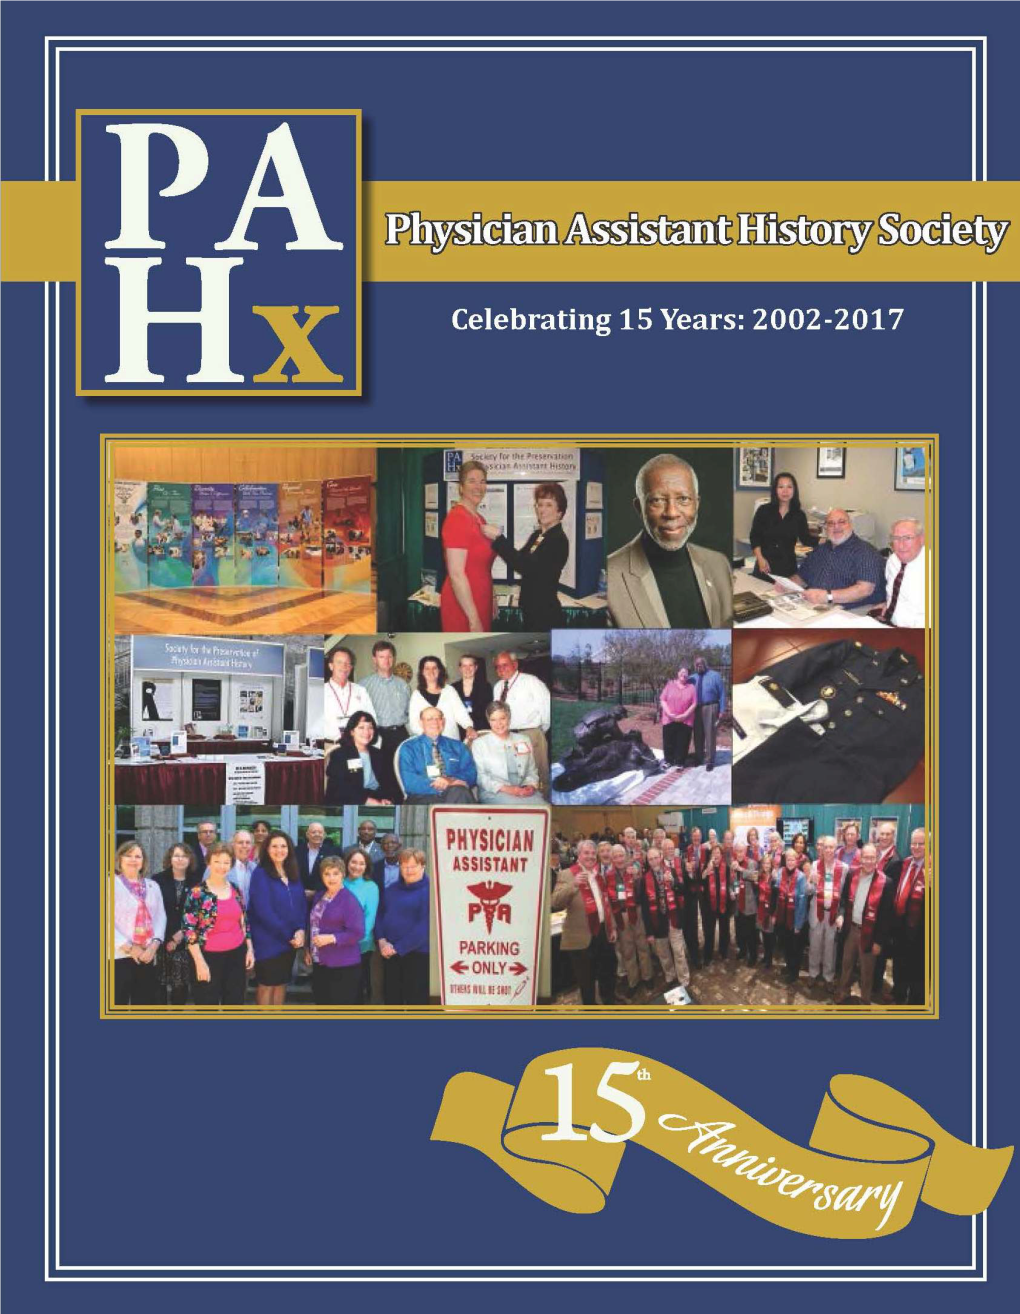 Physician Assistant History Society, Celebrating 15 Years: 2002-2017